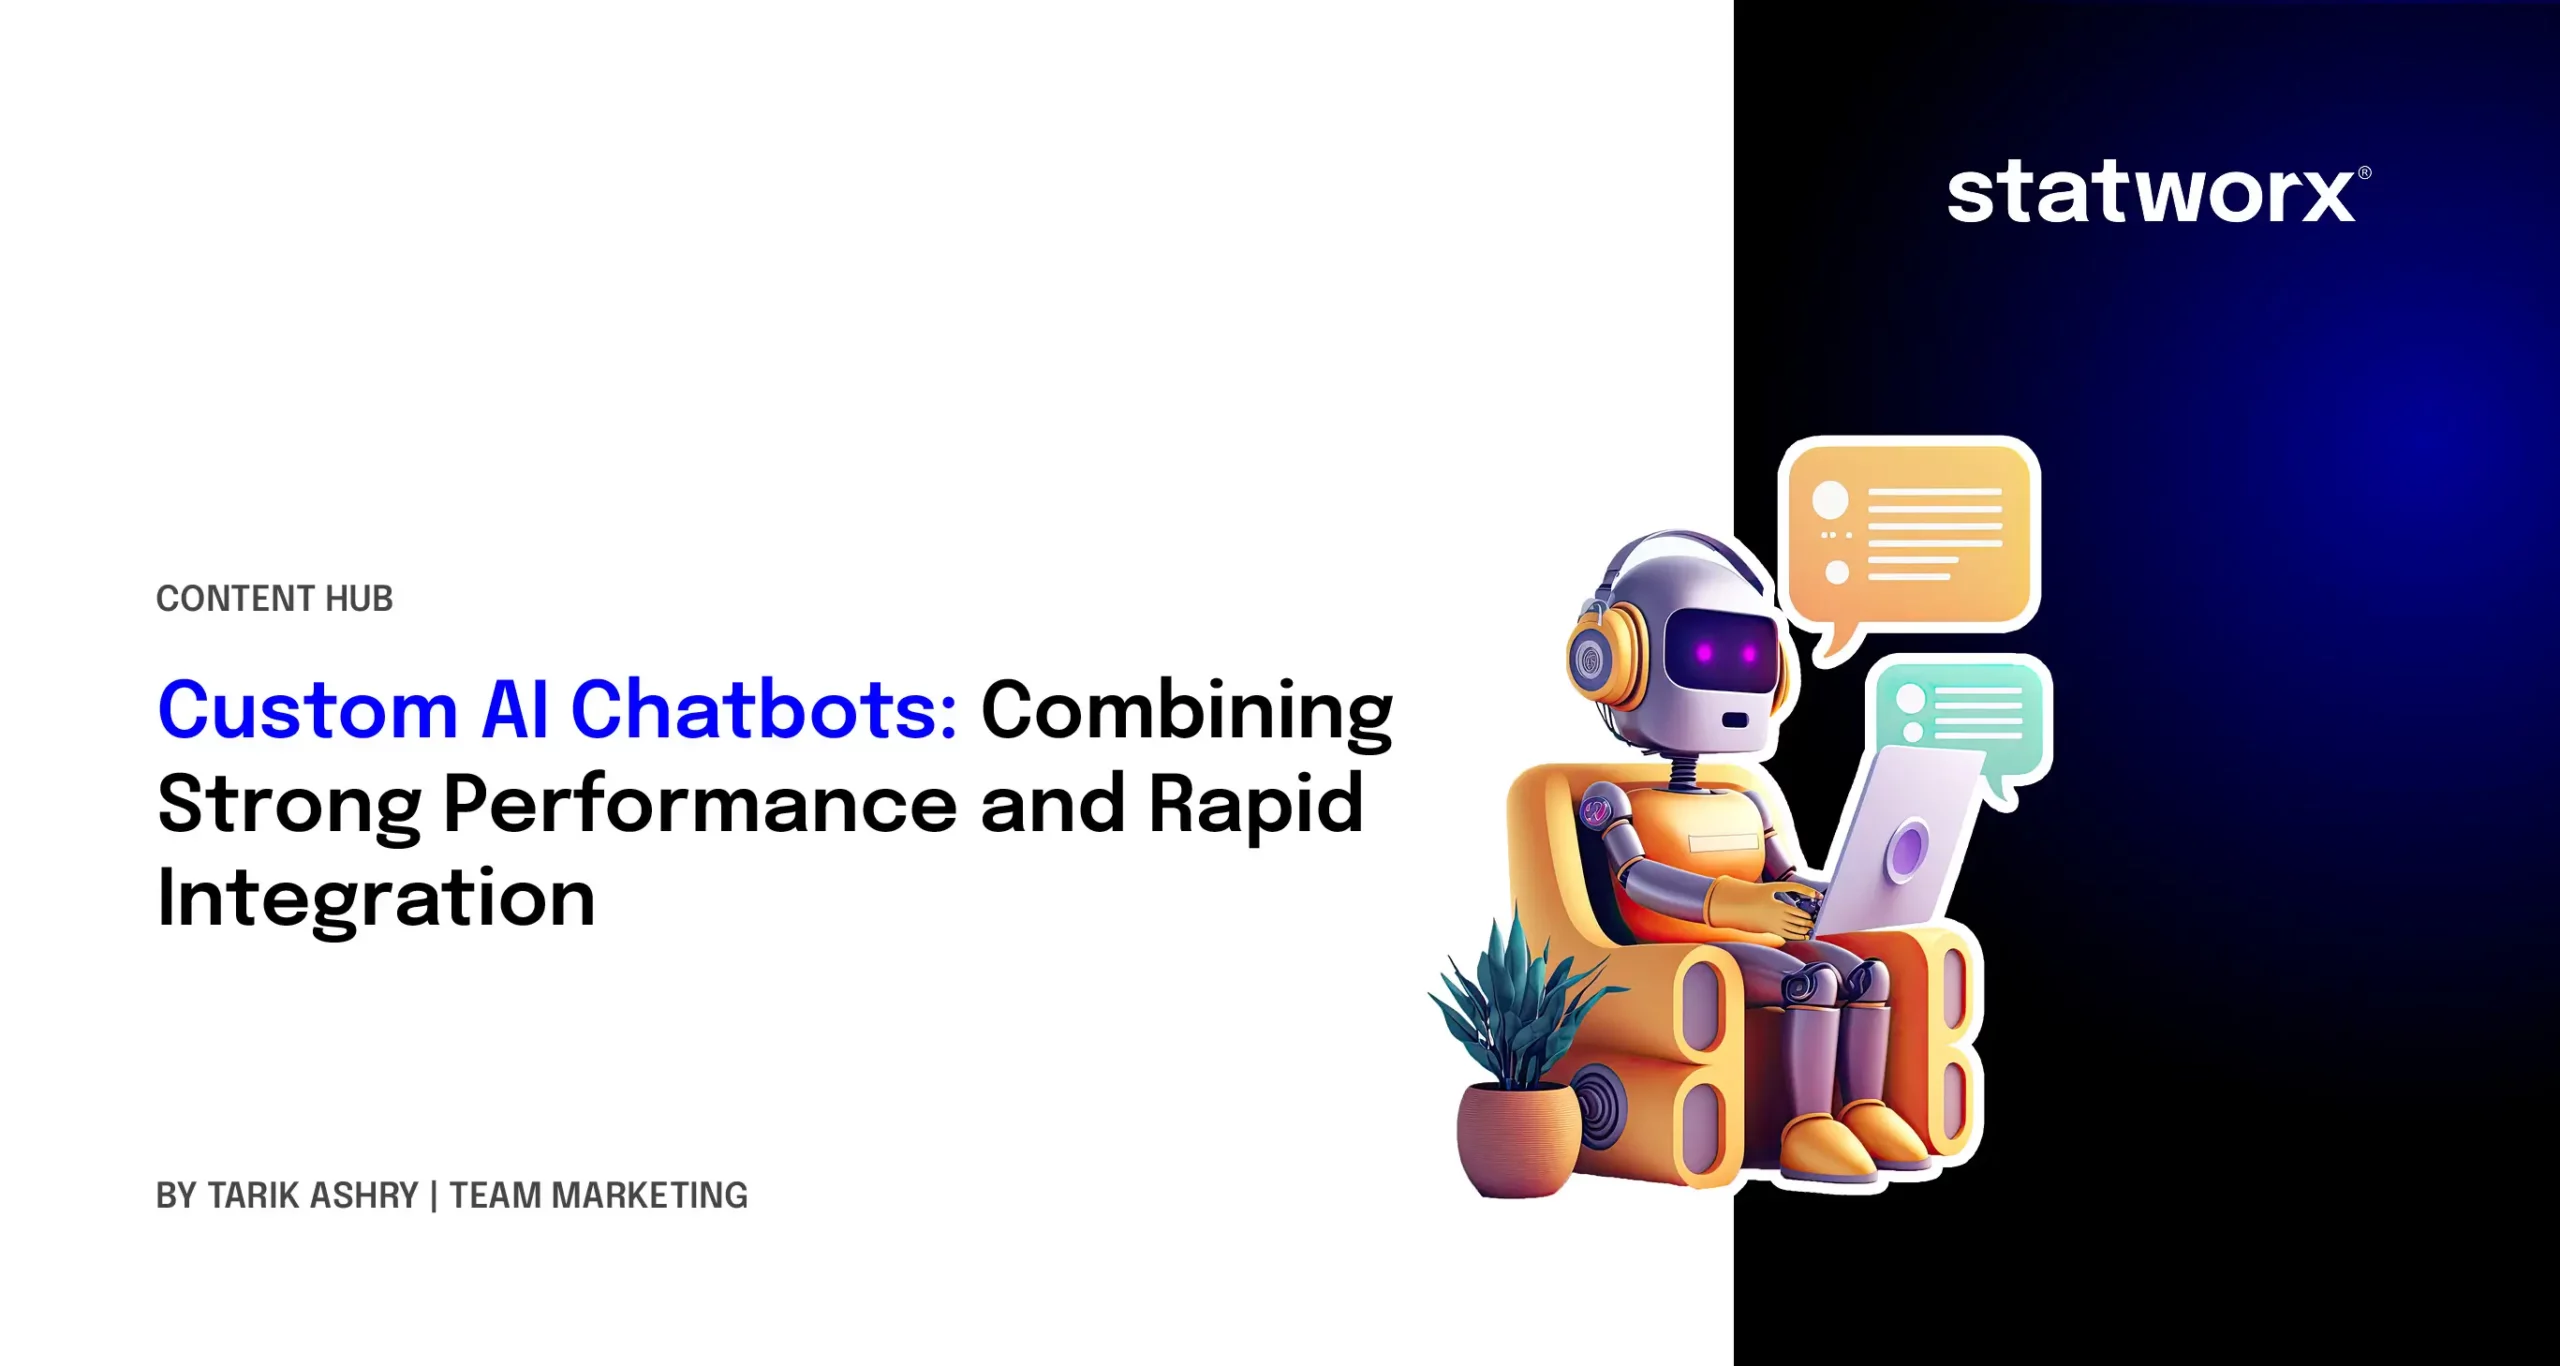 Custom AI Chatbots: Combining Strong Performance and Rapid Integration